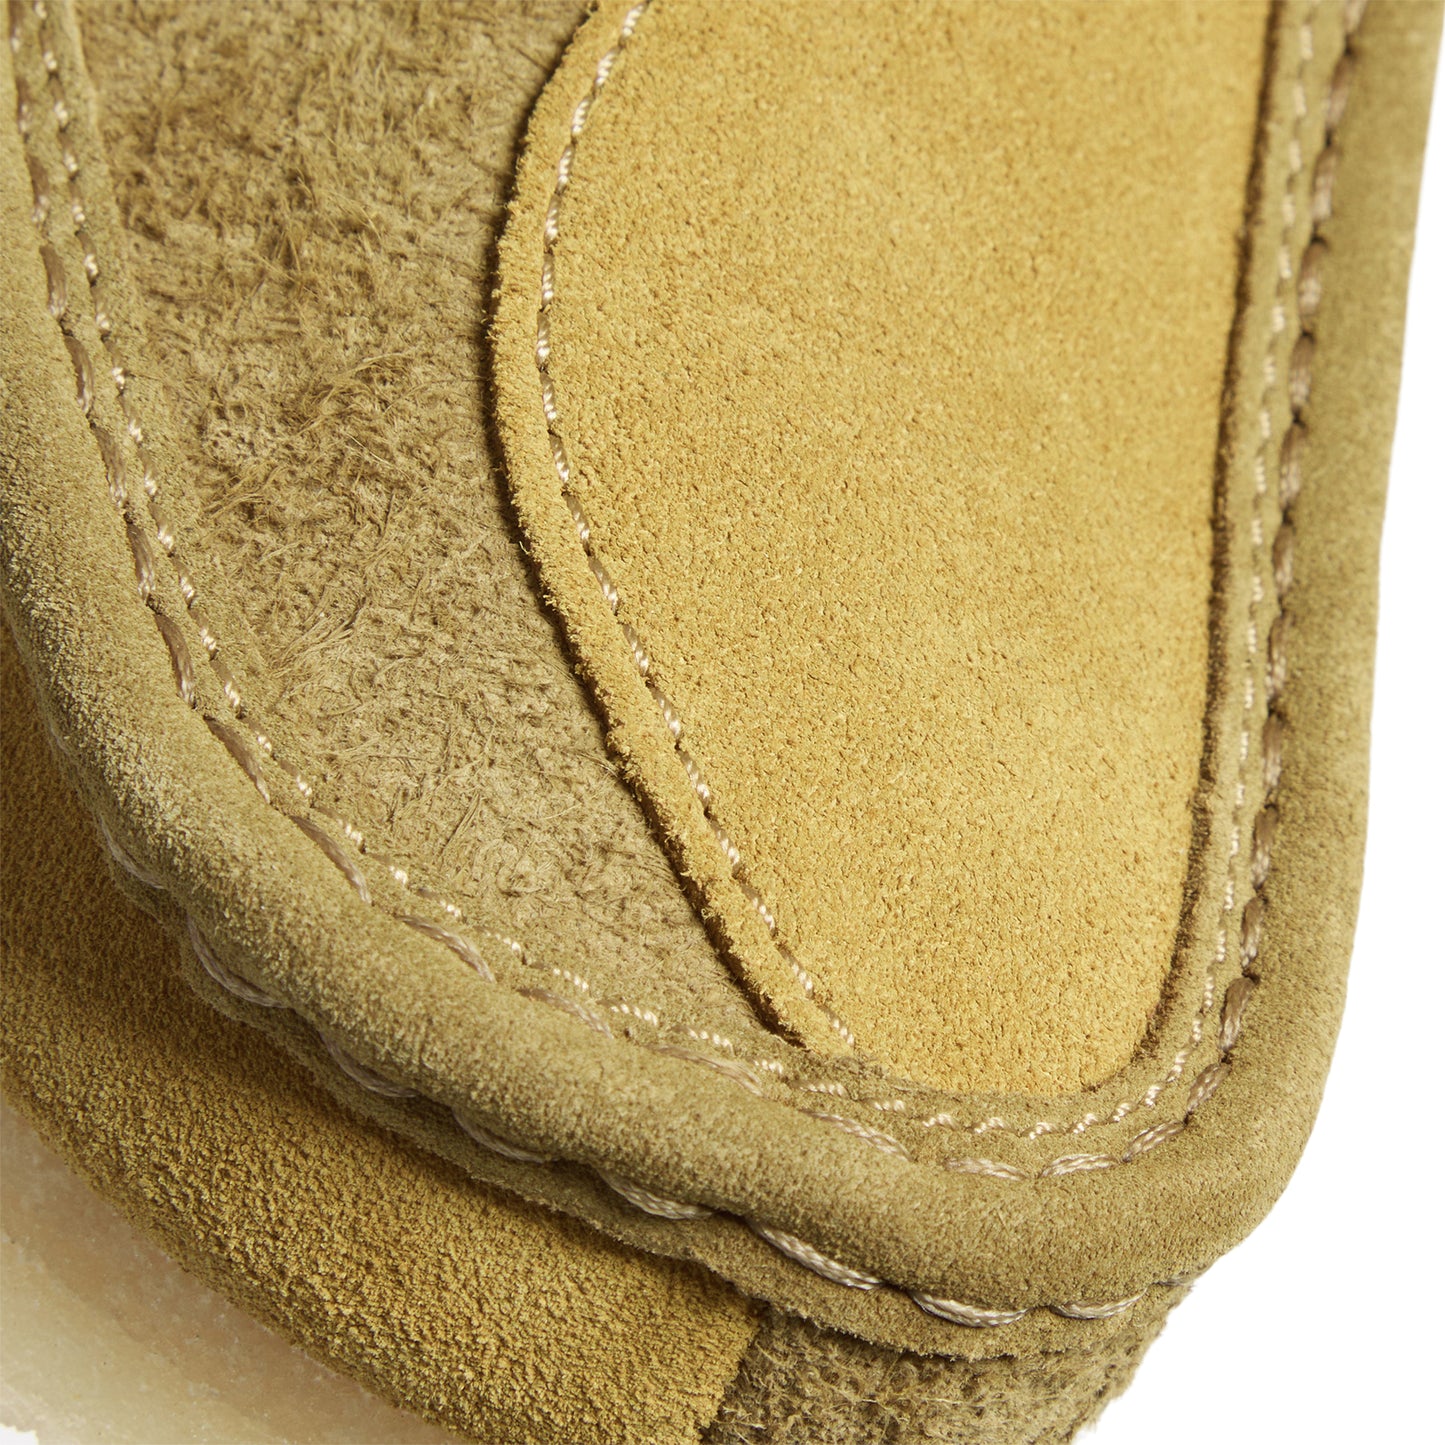 Clarks Wallabee (Olive)